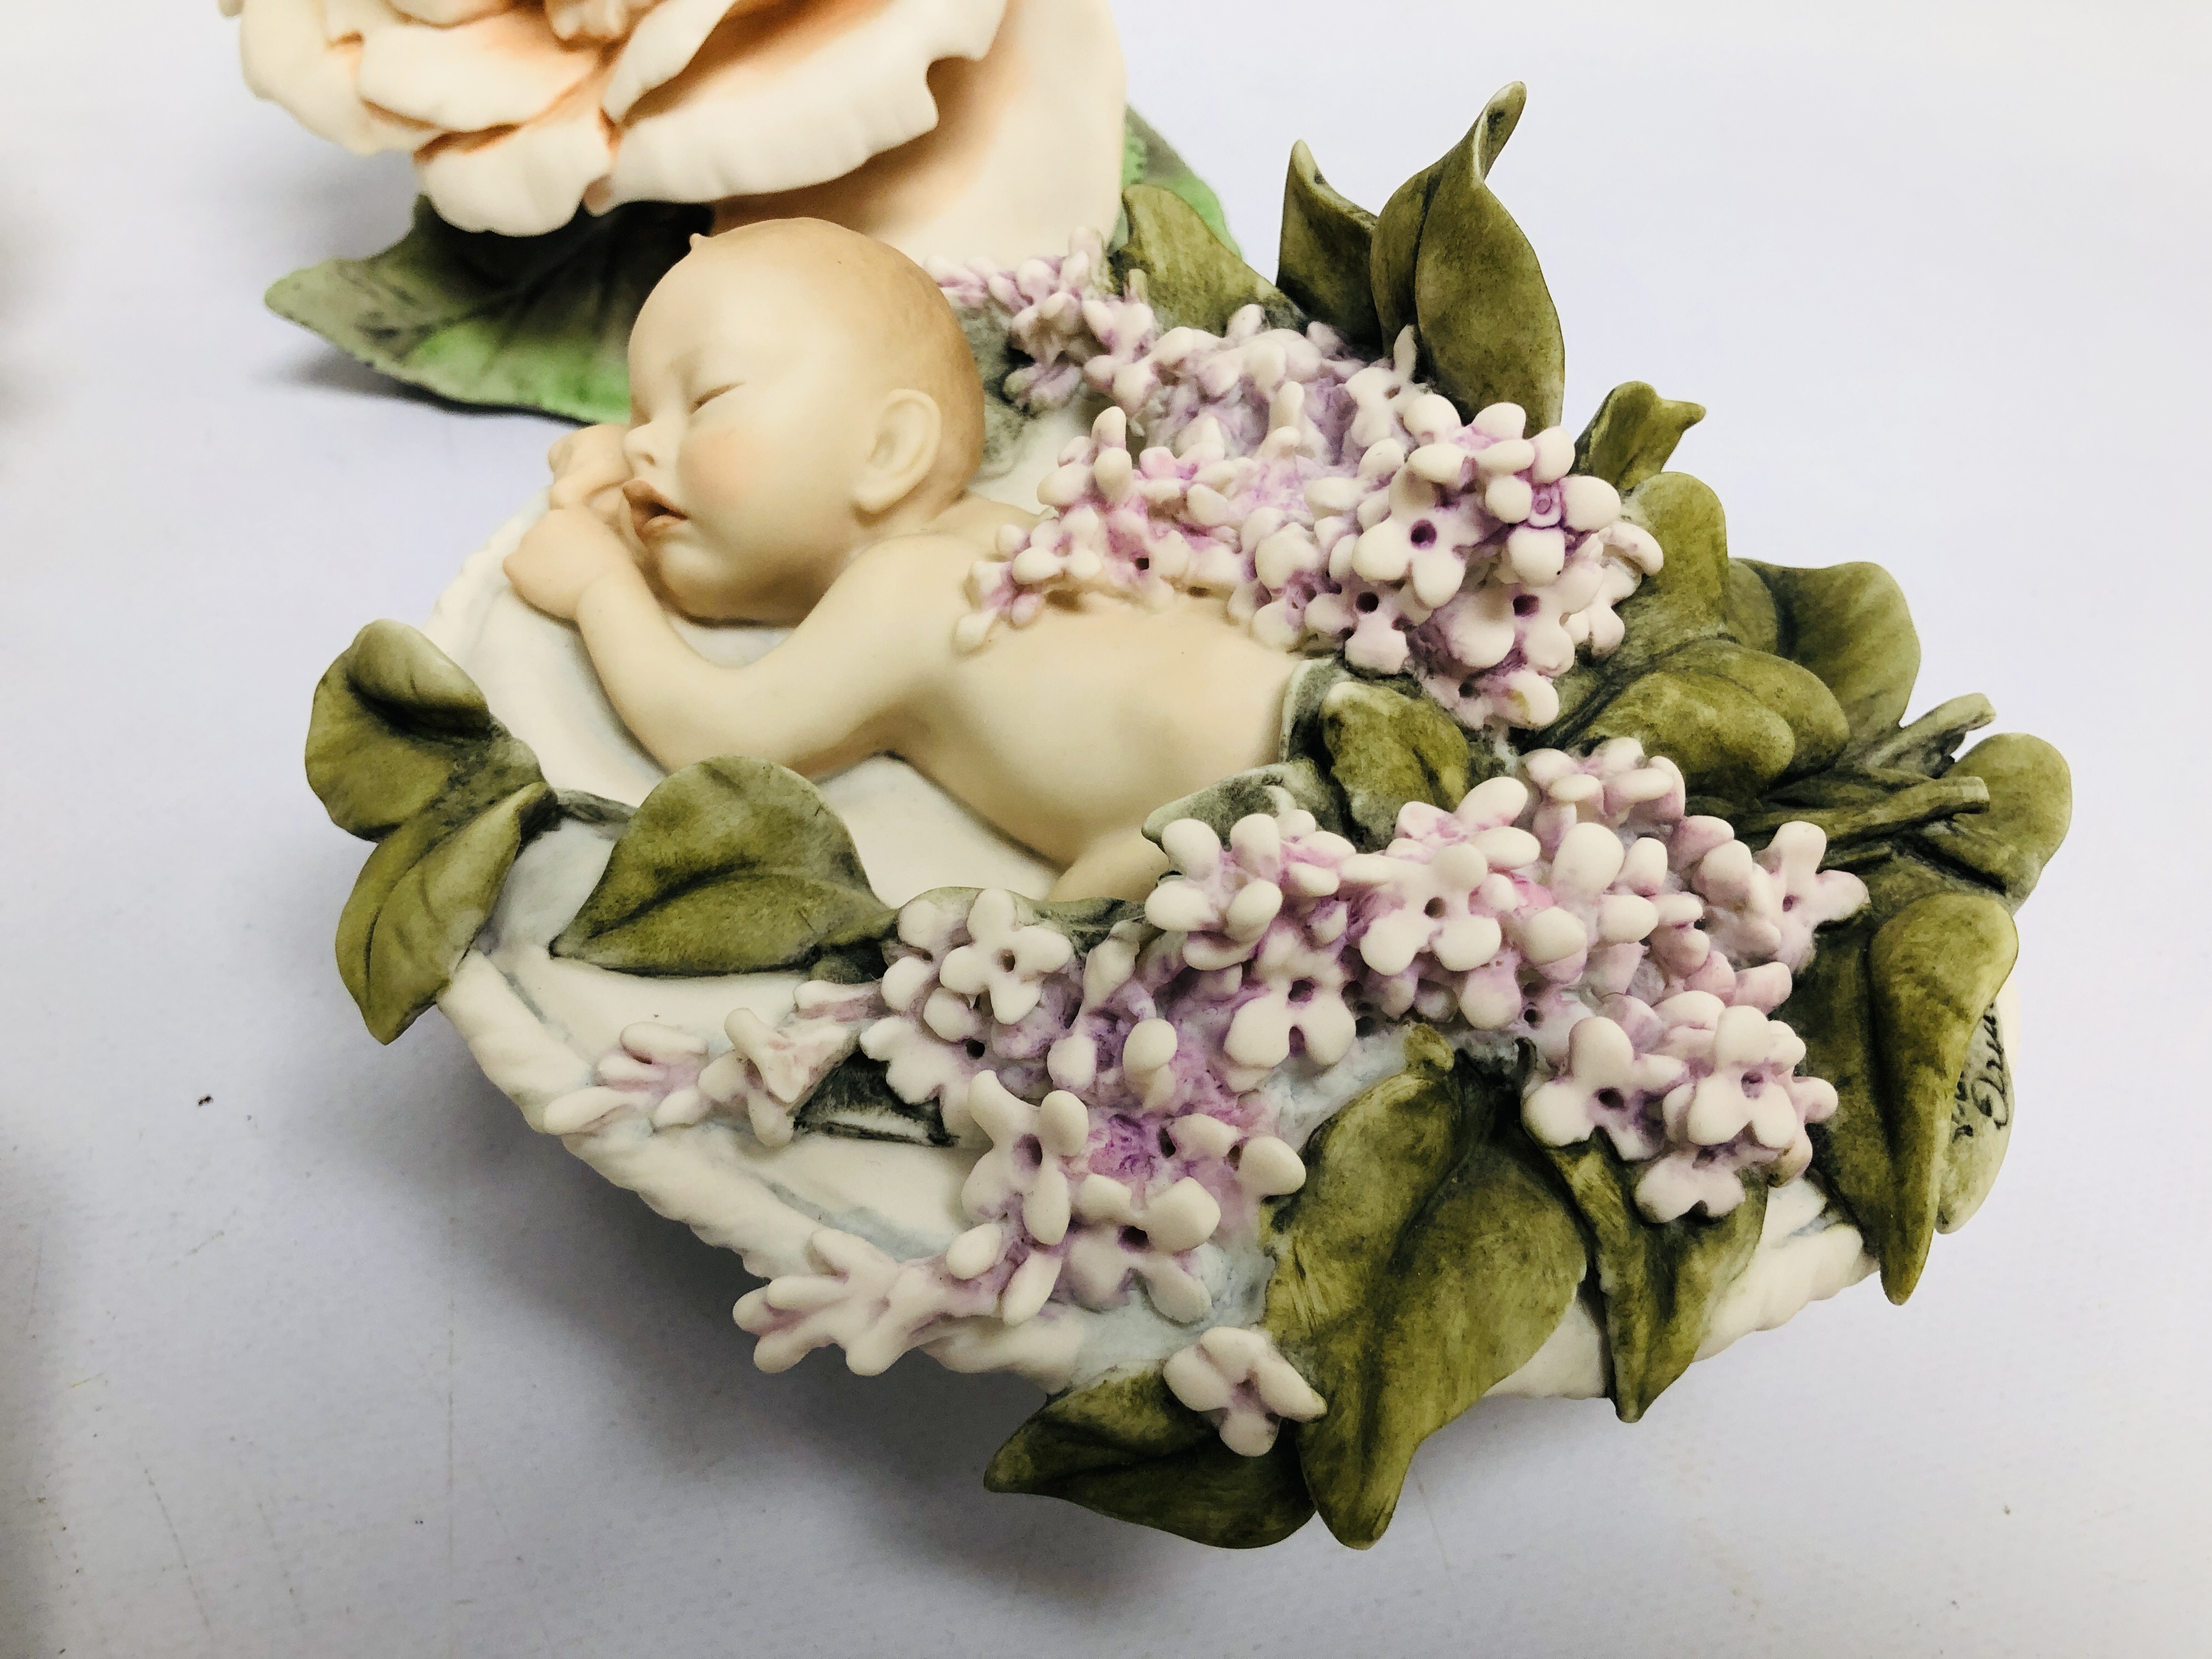 6 BOXED FLORENCE SLEEPING BABY FIGURES TO INCLUDE WATER LILY BABY, ROSE BABY, DAISY BABY, - Image 6 of 8